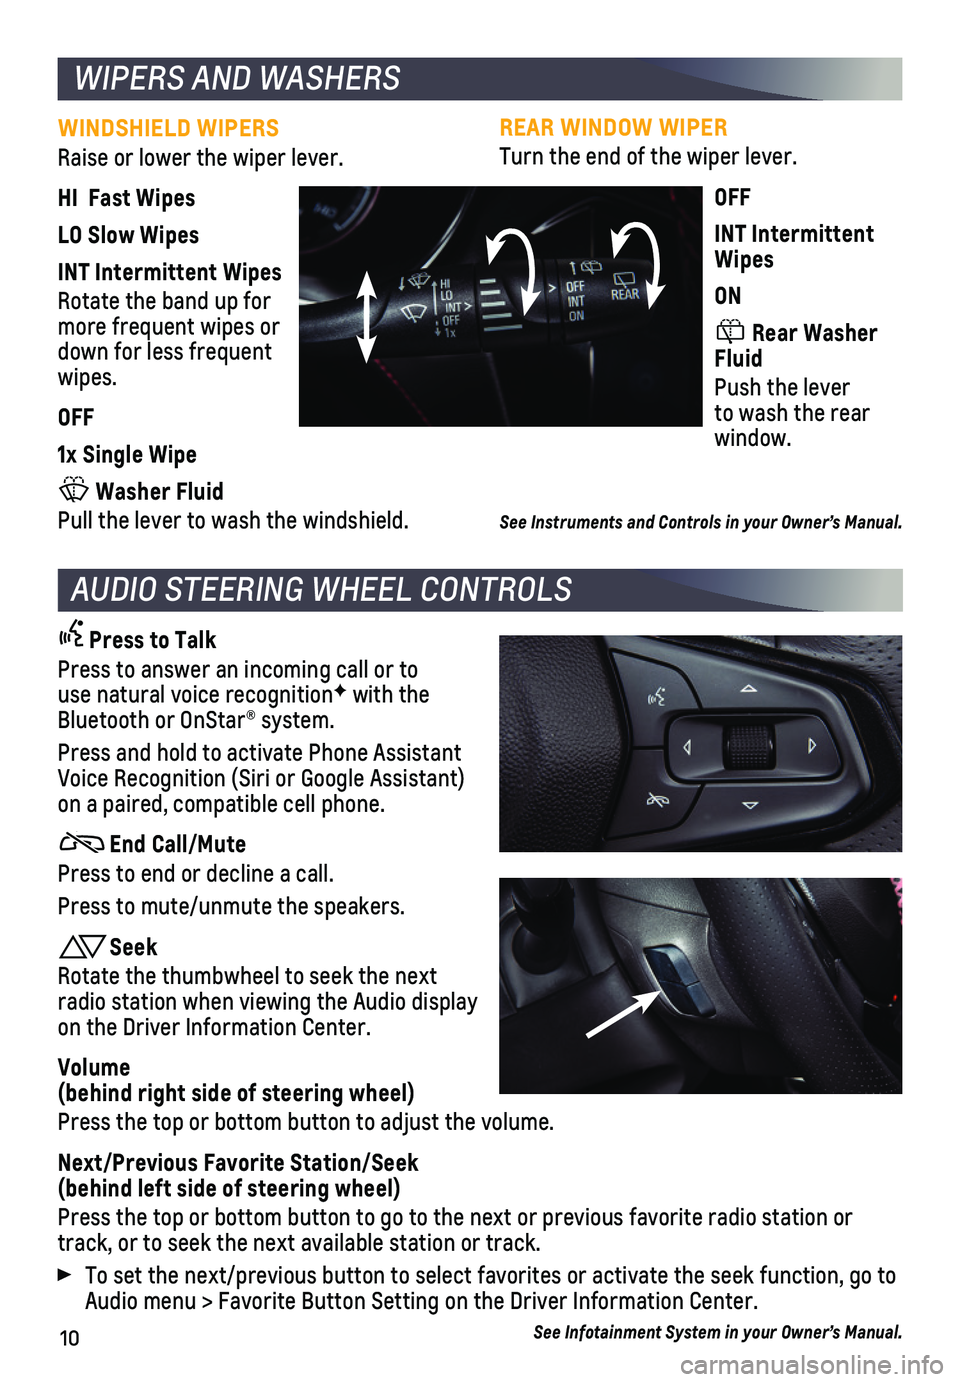 CHEVROLET TRAILBLAZER 2021  Get To Know Guide 10
REAR WINDOW WIPER
Turn the end of the wiper lever.
OFF
INT Intermittent Wipes
ON
 Rear Washer Fluid
Push the lever to wash the rear  window.
See Instruments and Controls in your Owner’s Manual. 
